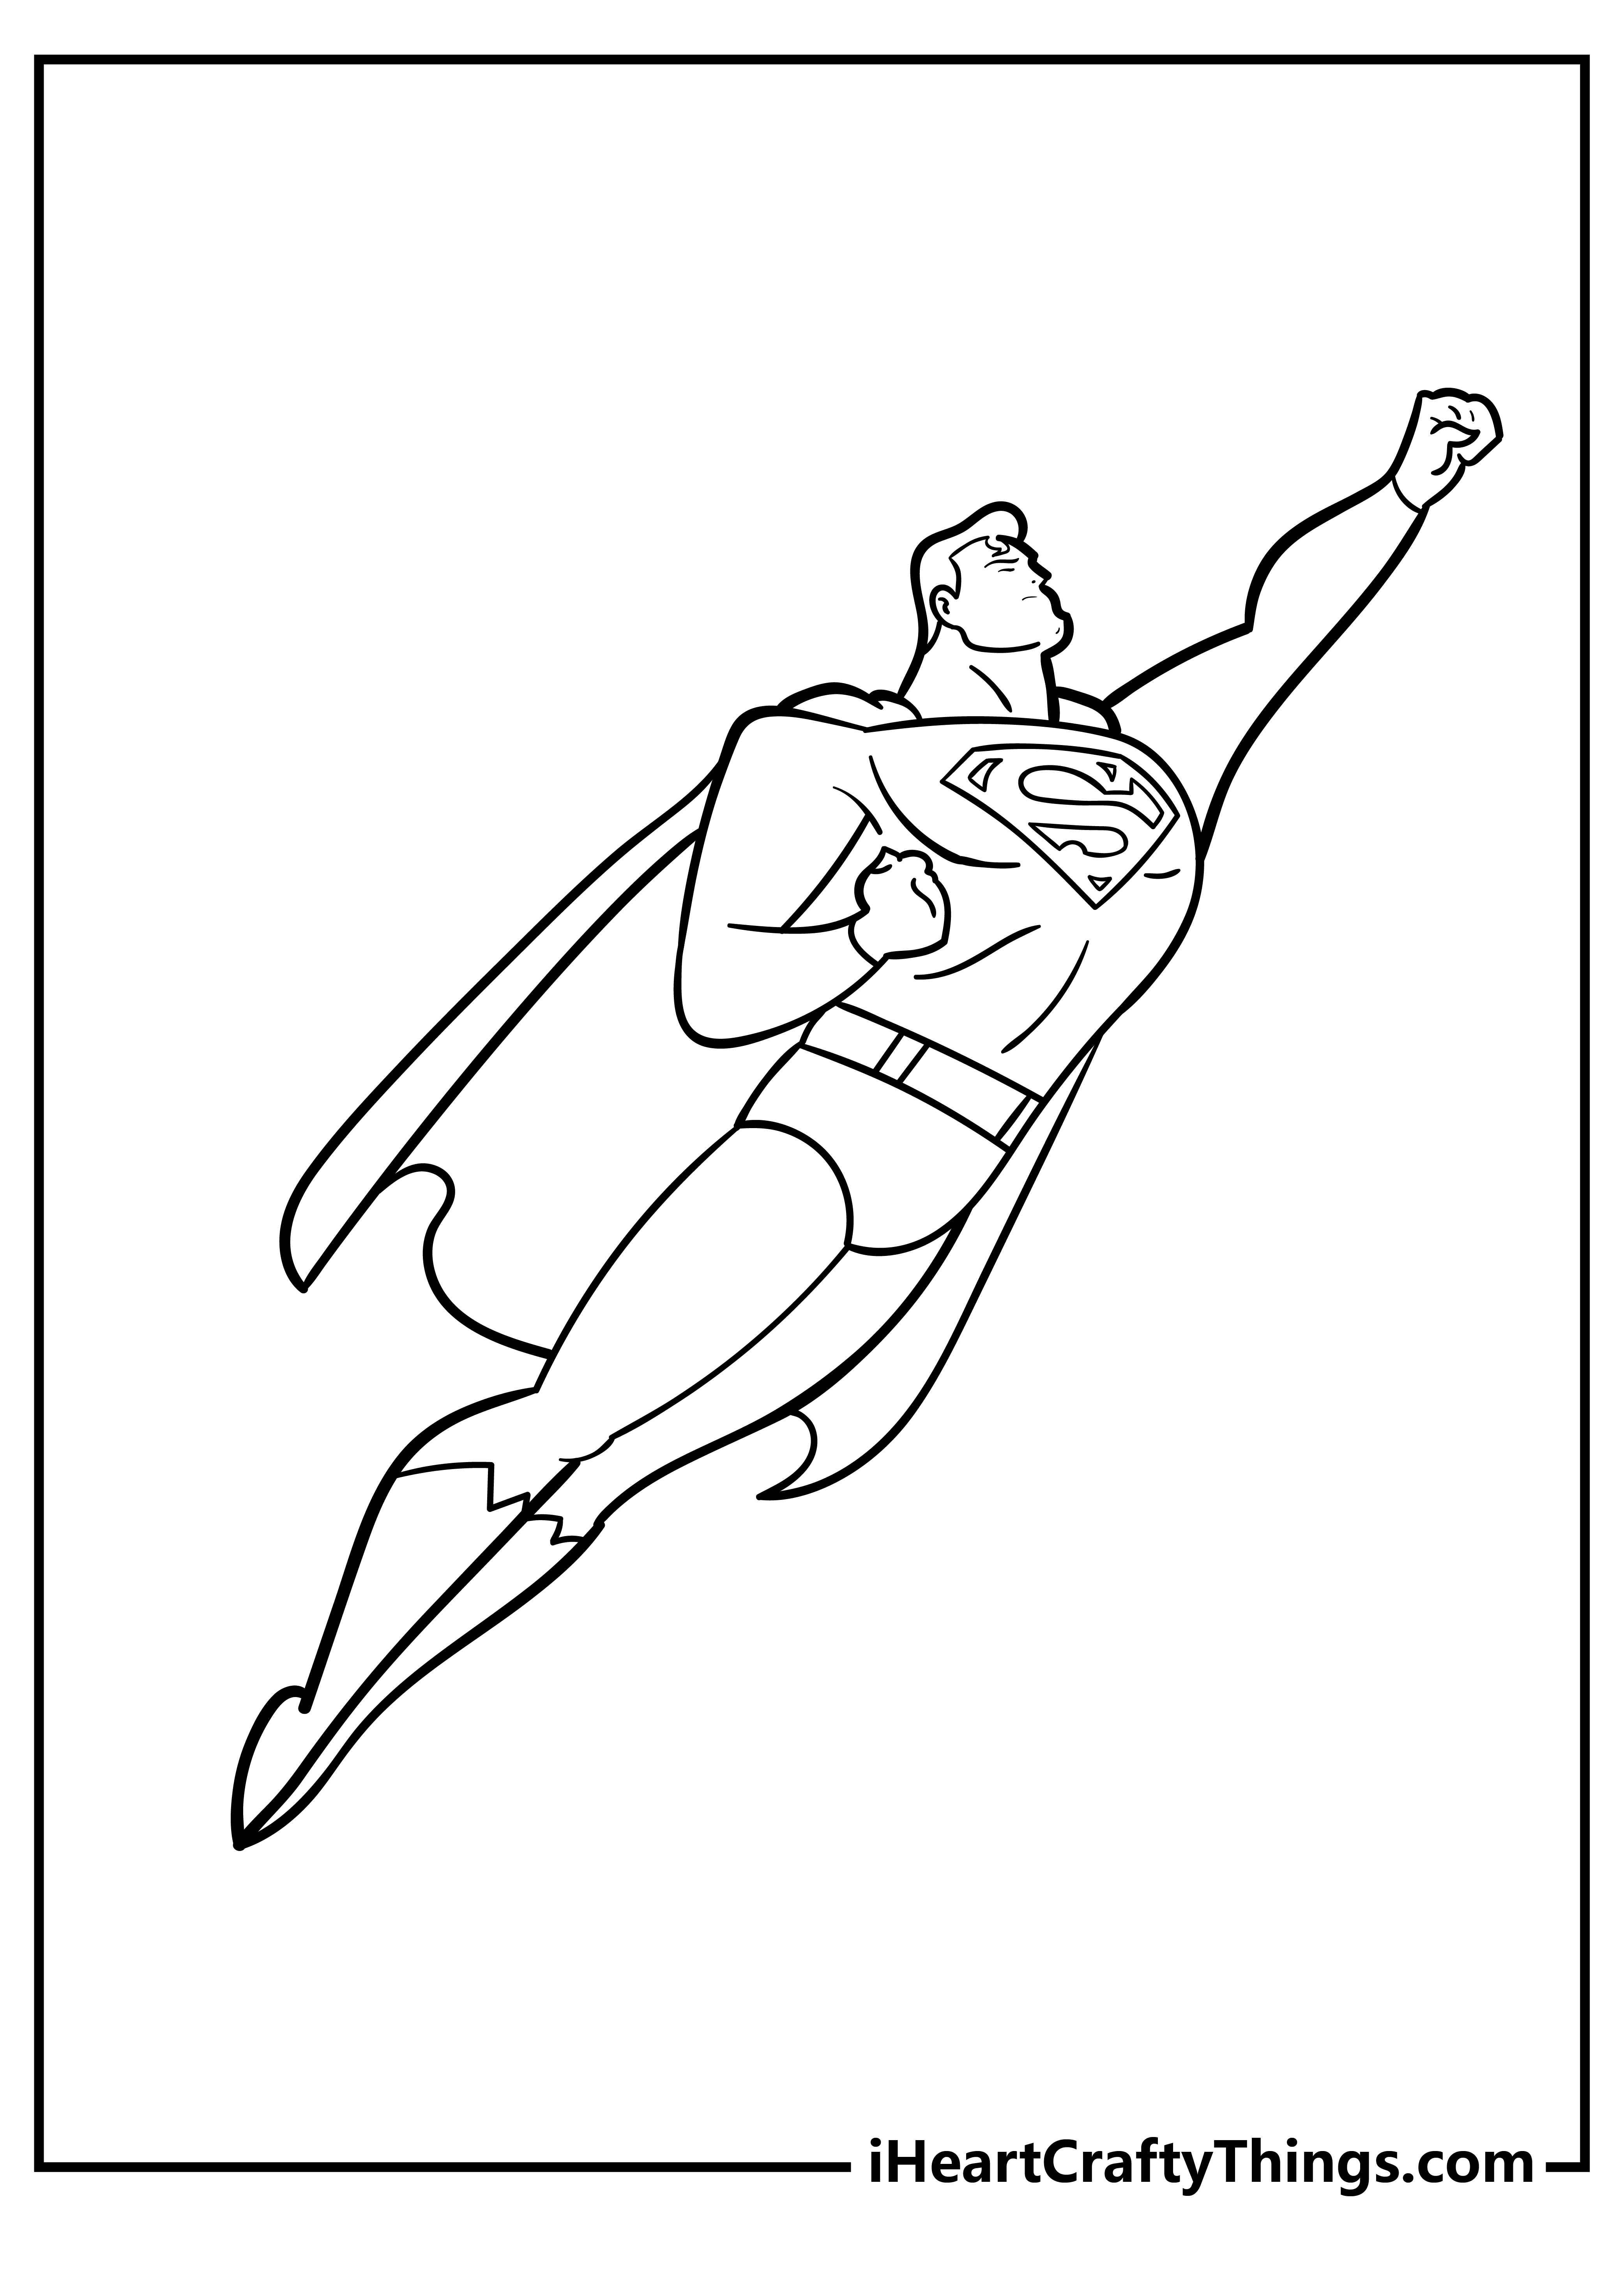 Superman Coloring Pages for kids free download